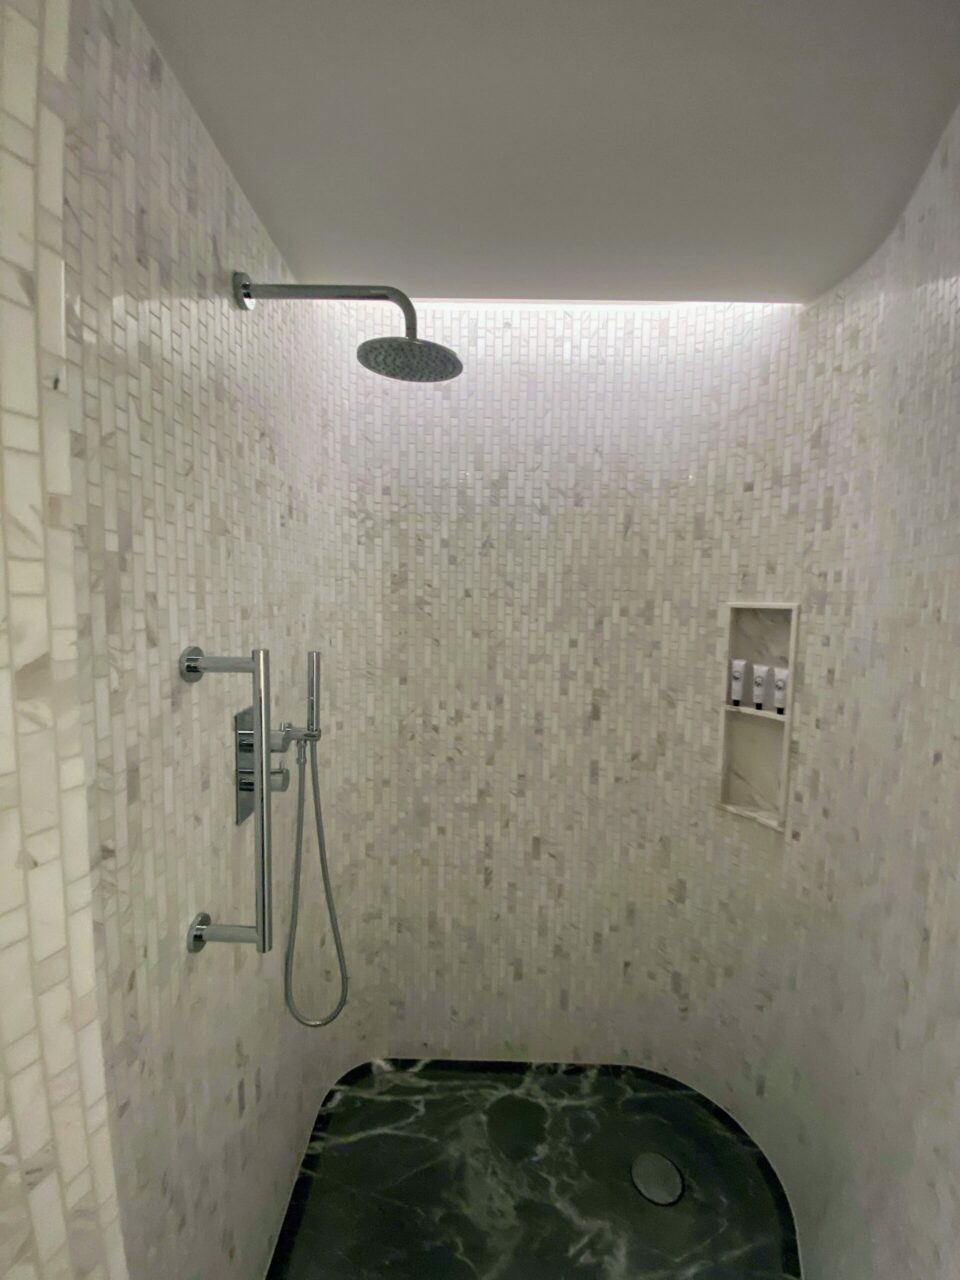 Pan Pacific Hotel London shower room 